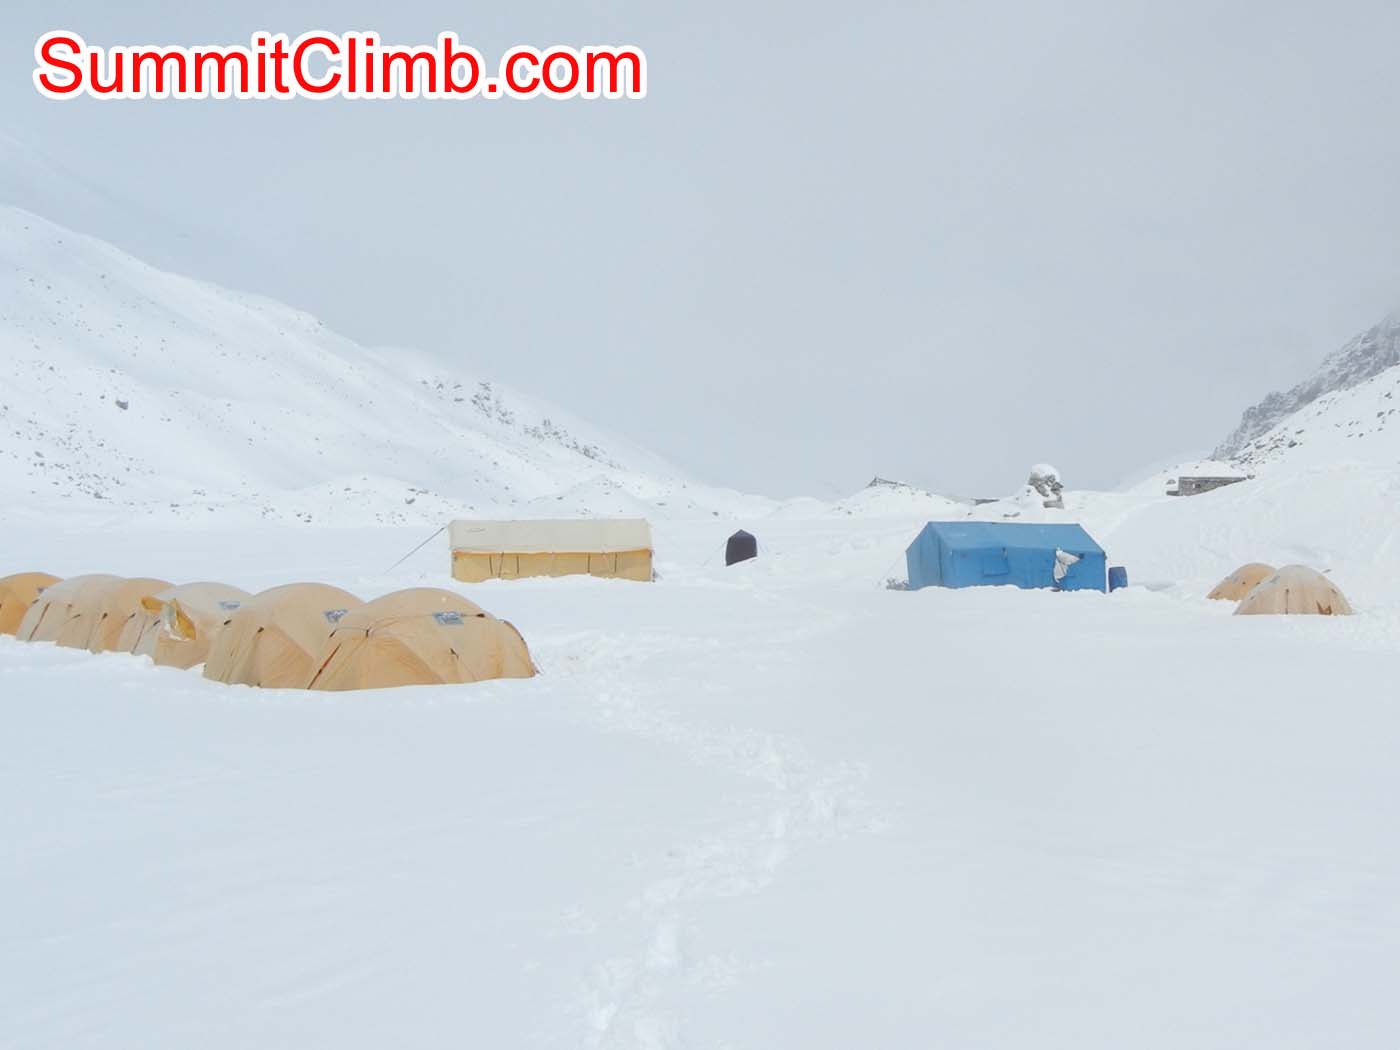 Everest Basecamp after digging out tents from snowstorm - Photo Scott Patch